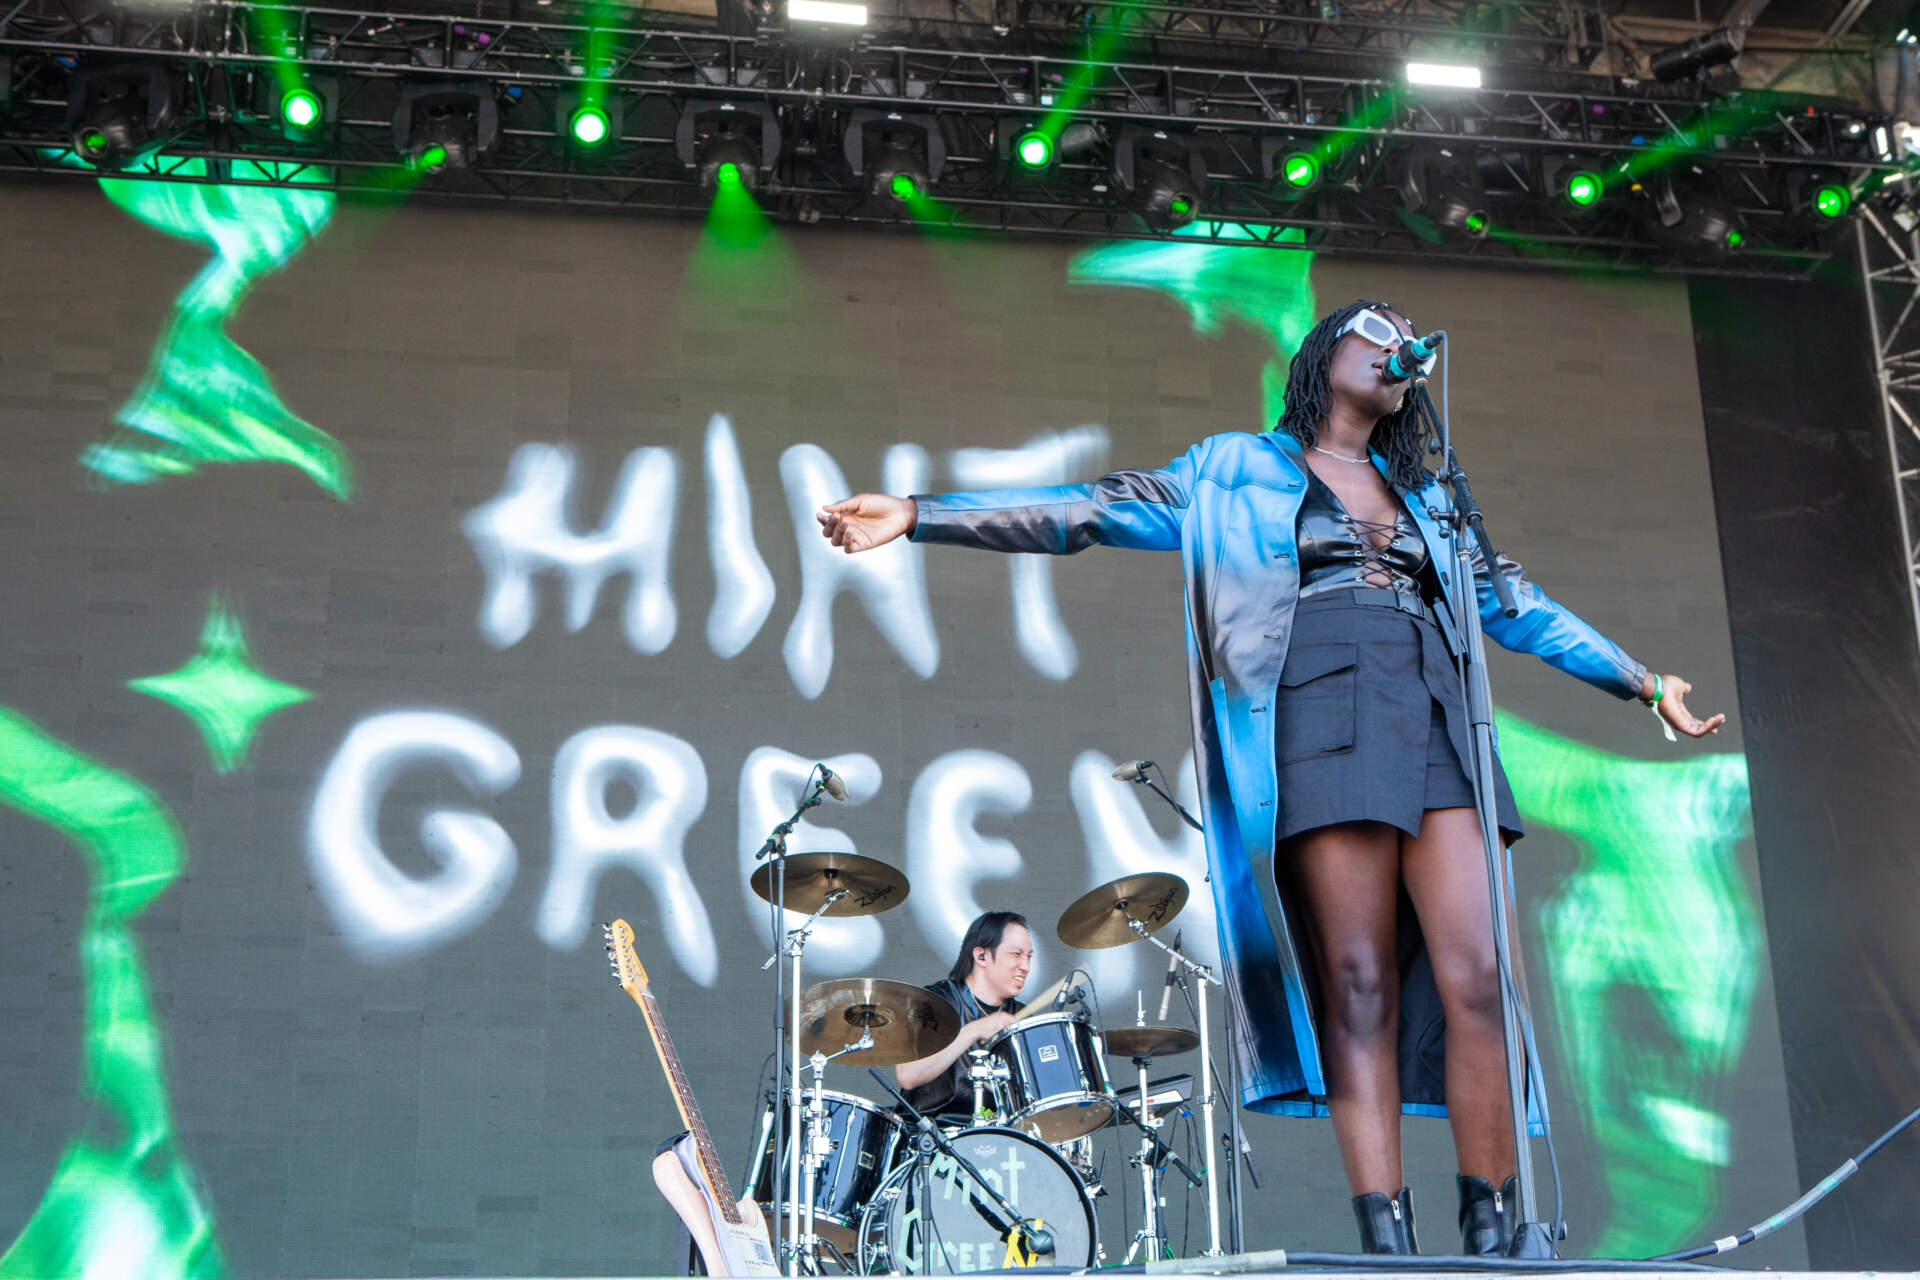 Boston-based band Mint Green performs on the Blue Stage at Boston Calling. (Jacob Garcia/WBUR)